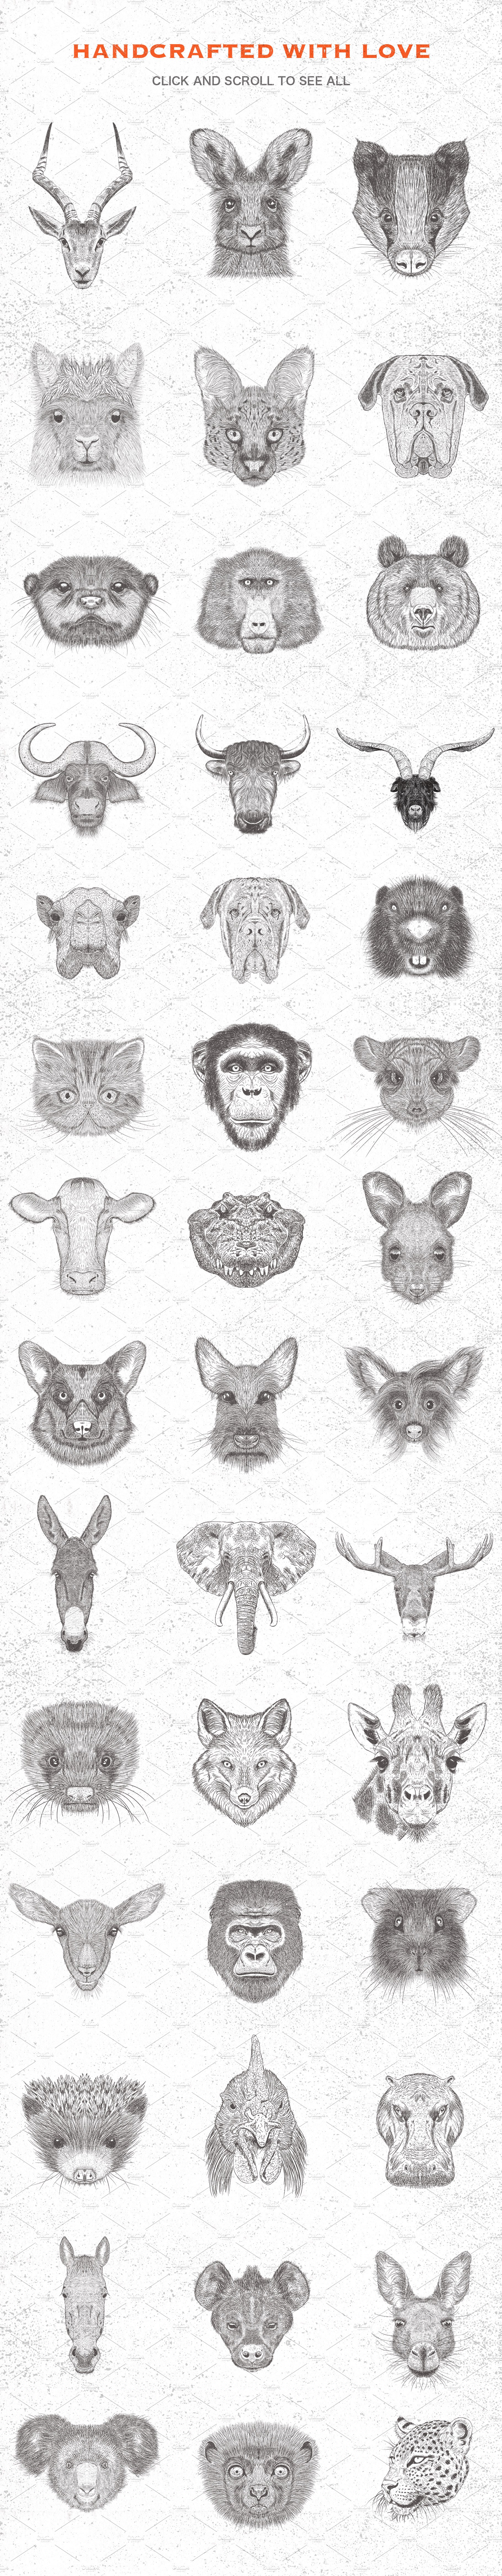 90 Animals Vintage Illustrations preview image.